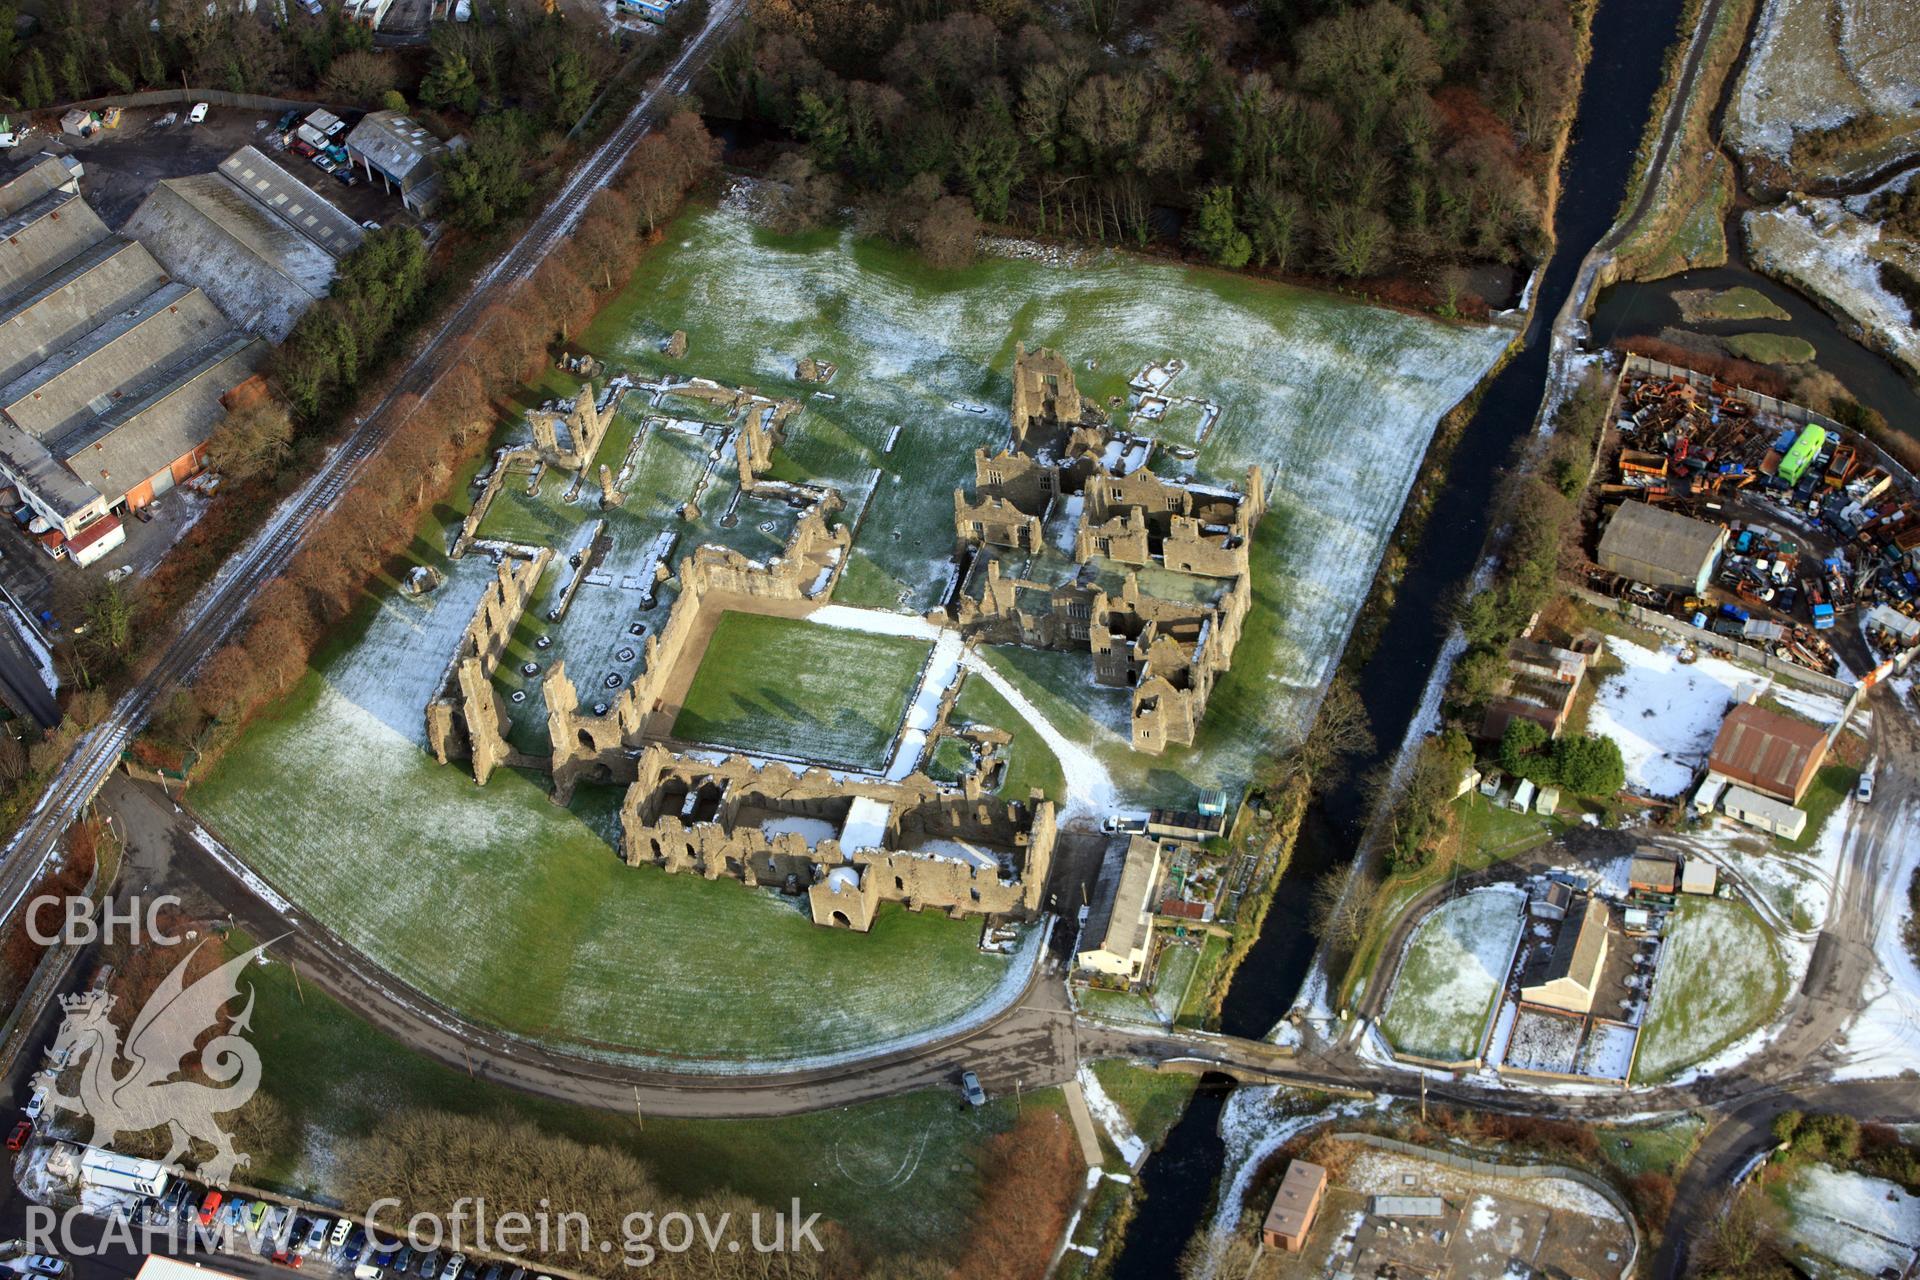 RCAHMW colour oblique aerial photograph of Neath Abbey under snow, by Toby Driver, 01/12/2010.